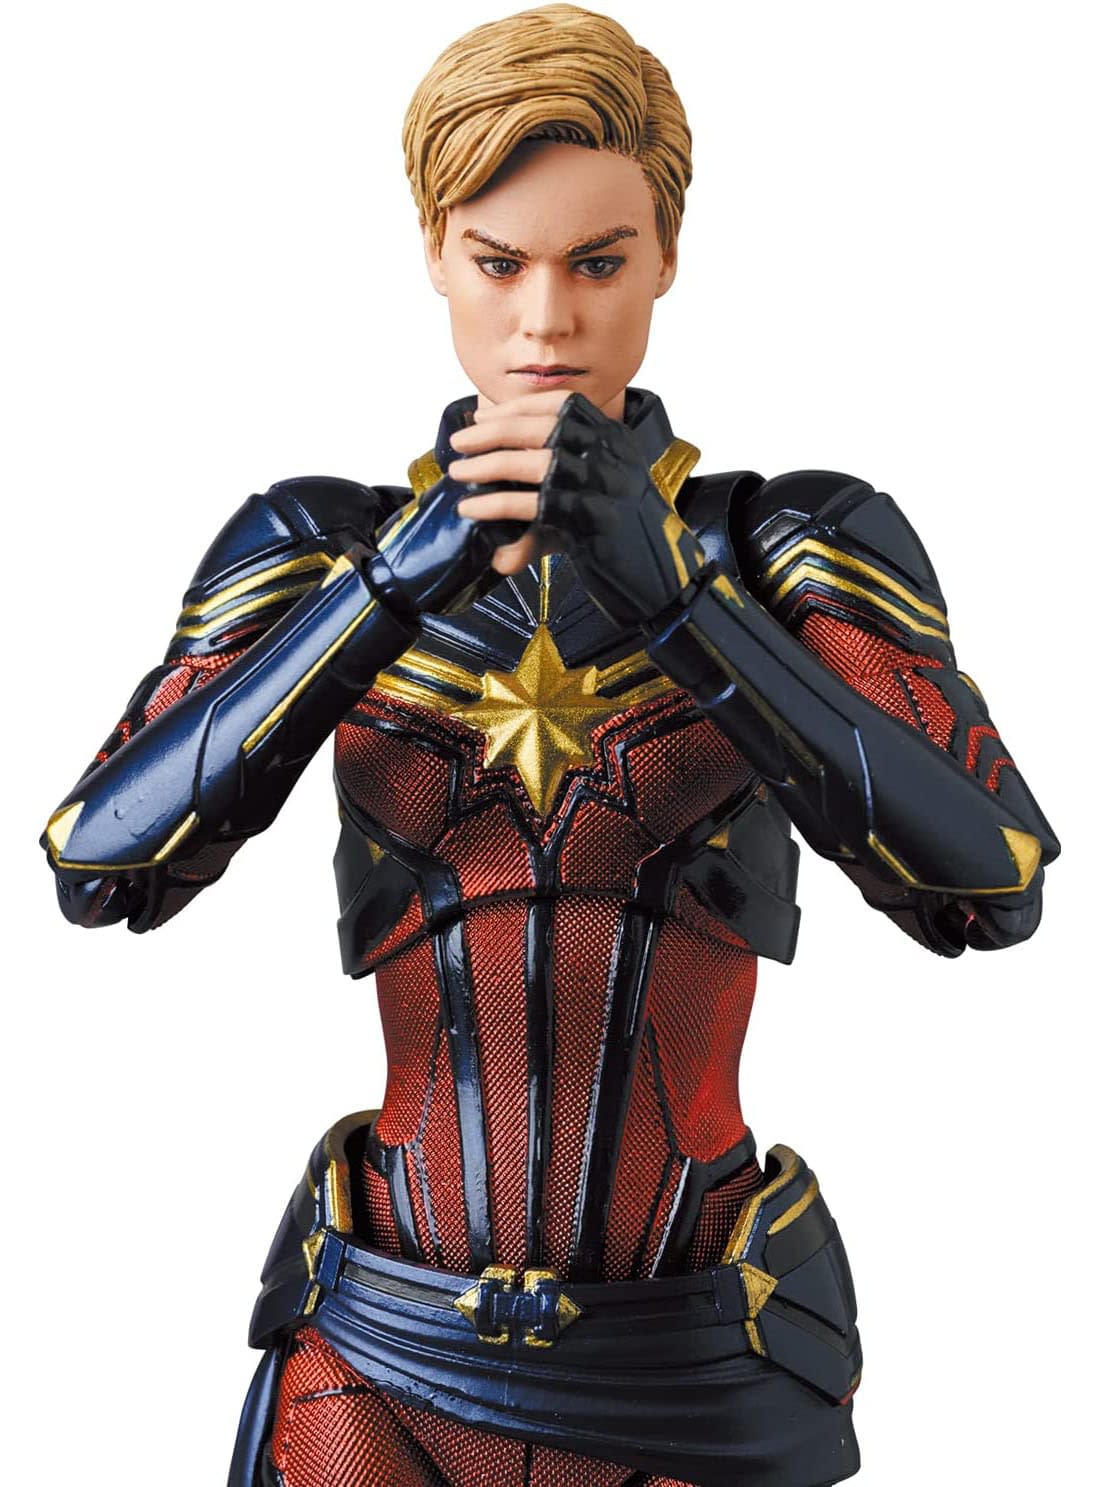 Captain Marvel Embraces the Endgame With New Marvel MAFEX Figure